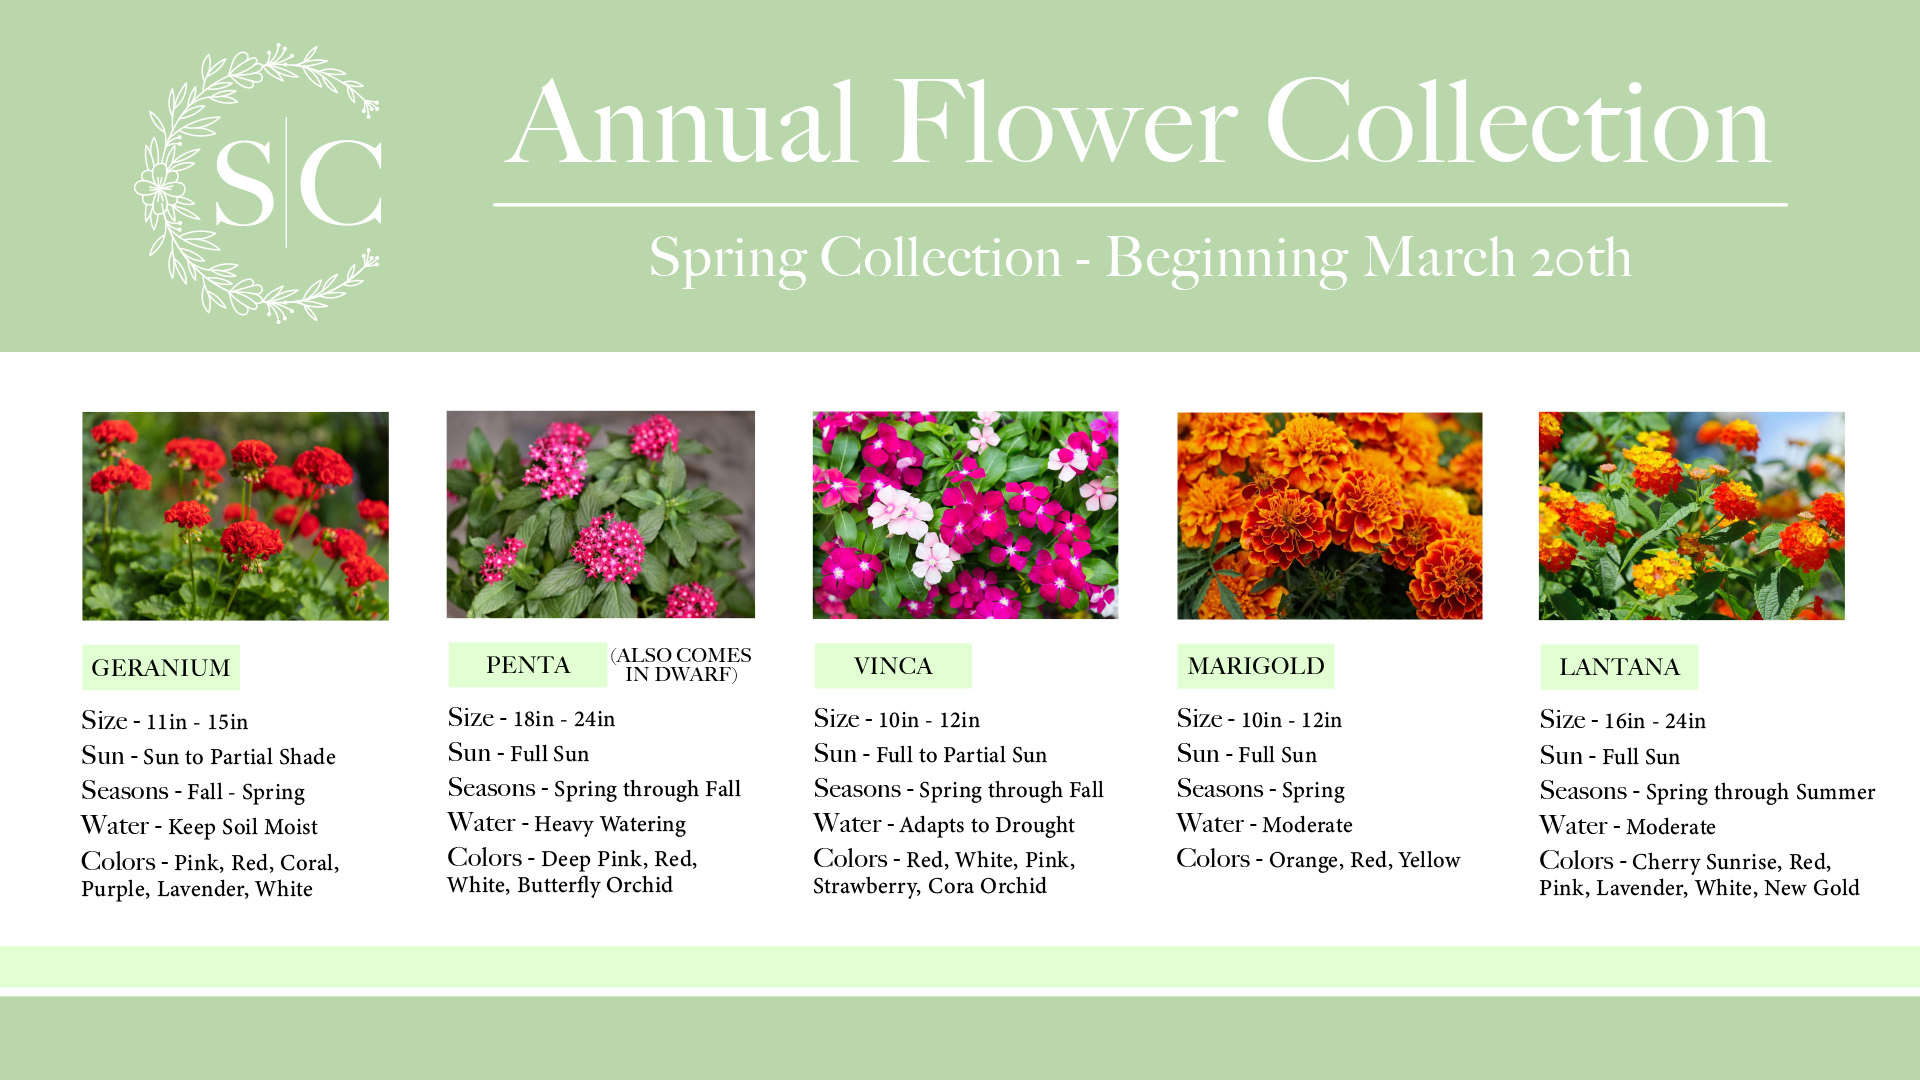 https://fortmyersgardenservice.com/wp-content/uploads/2022/11/FMGS-Annuals-Web-Graphics_Spring-Collection.jpg